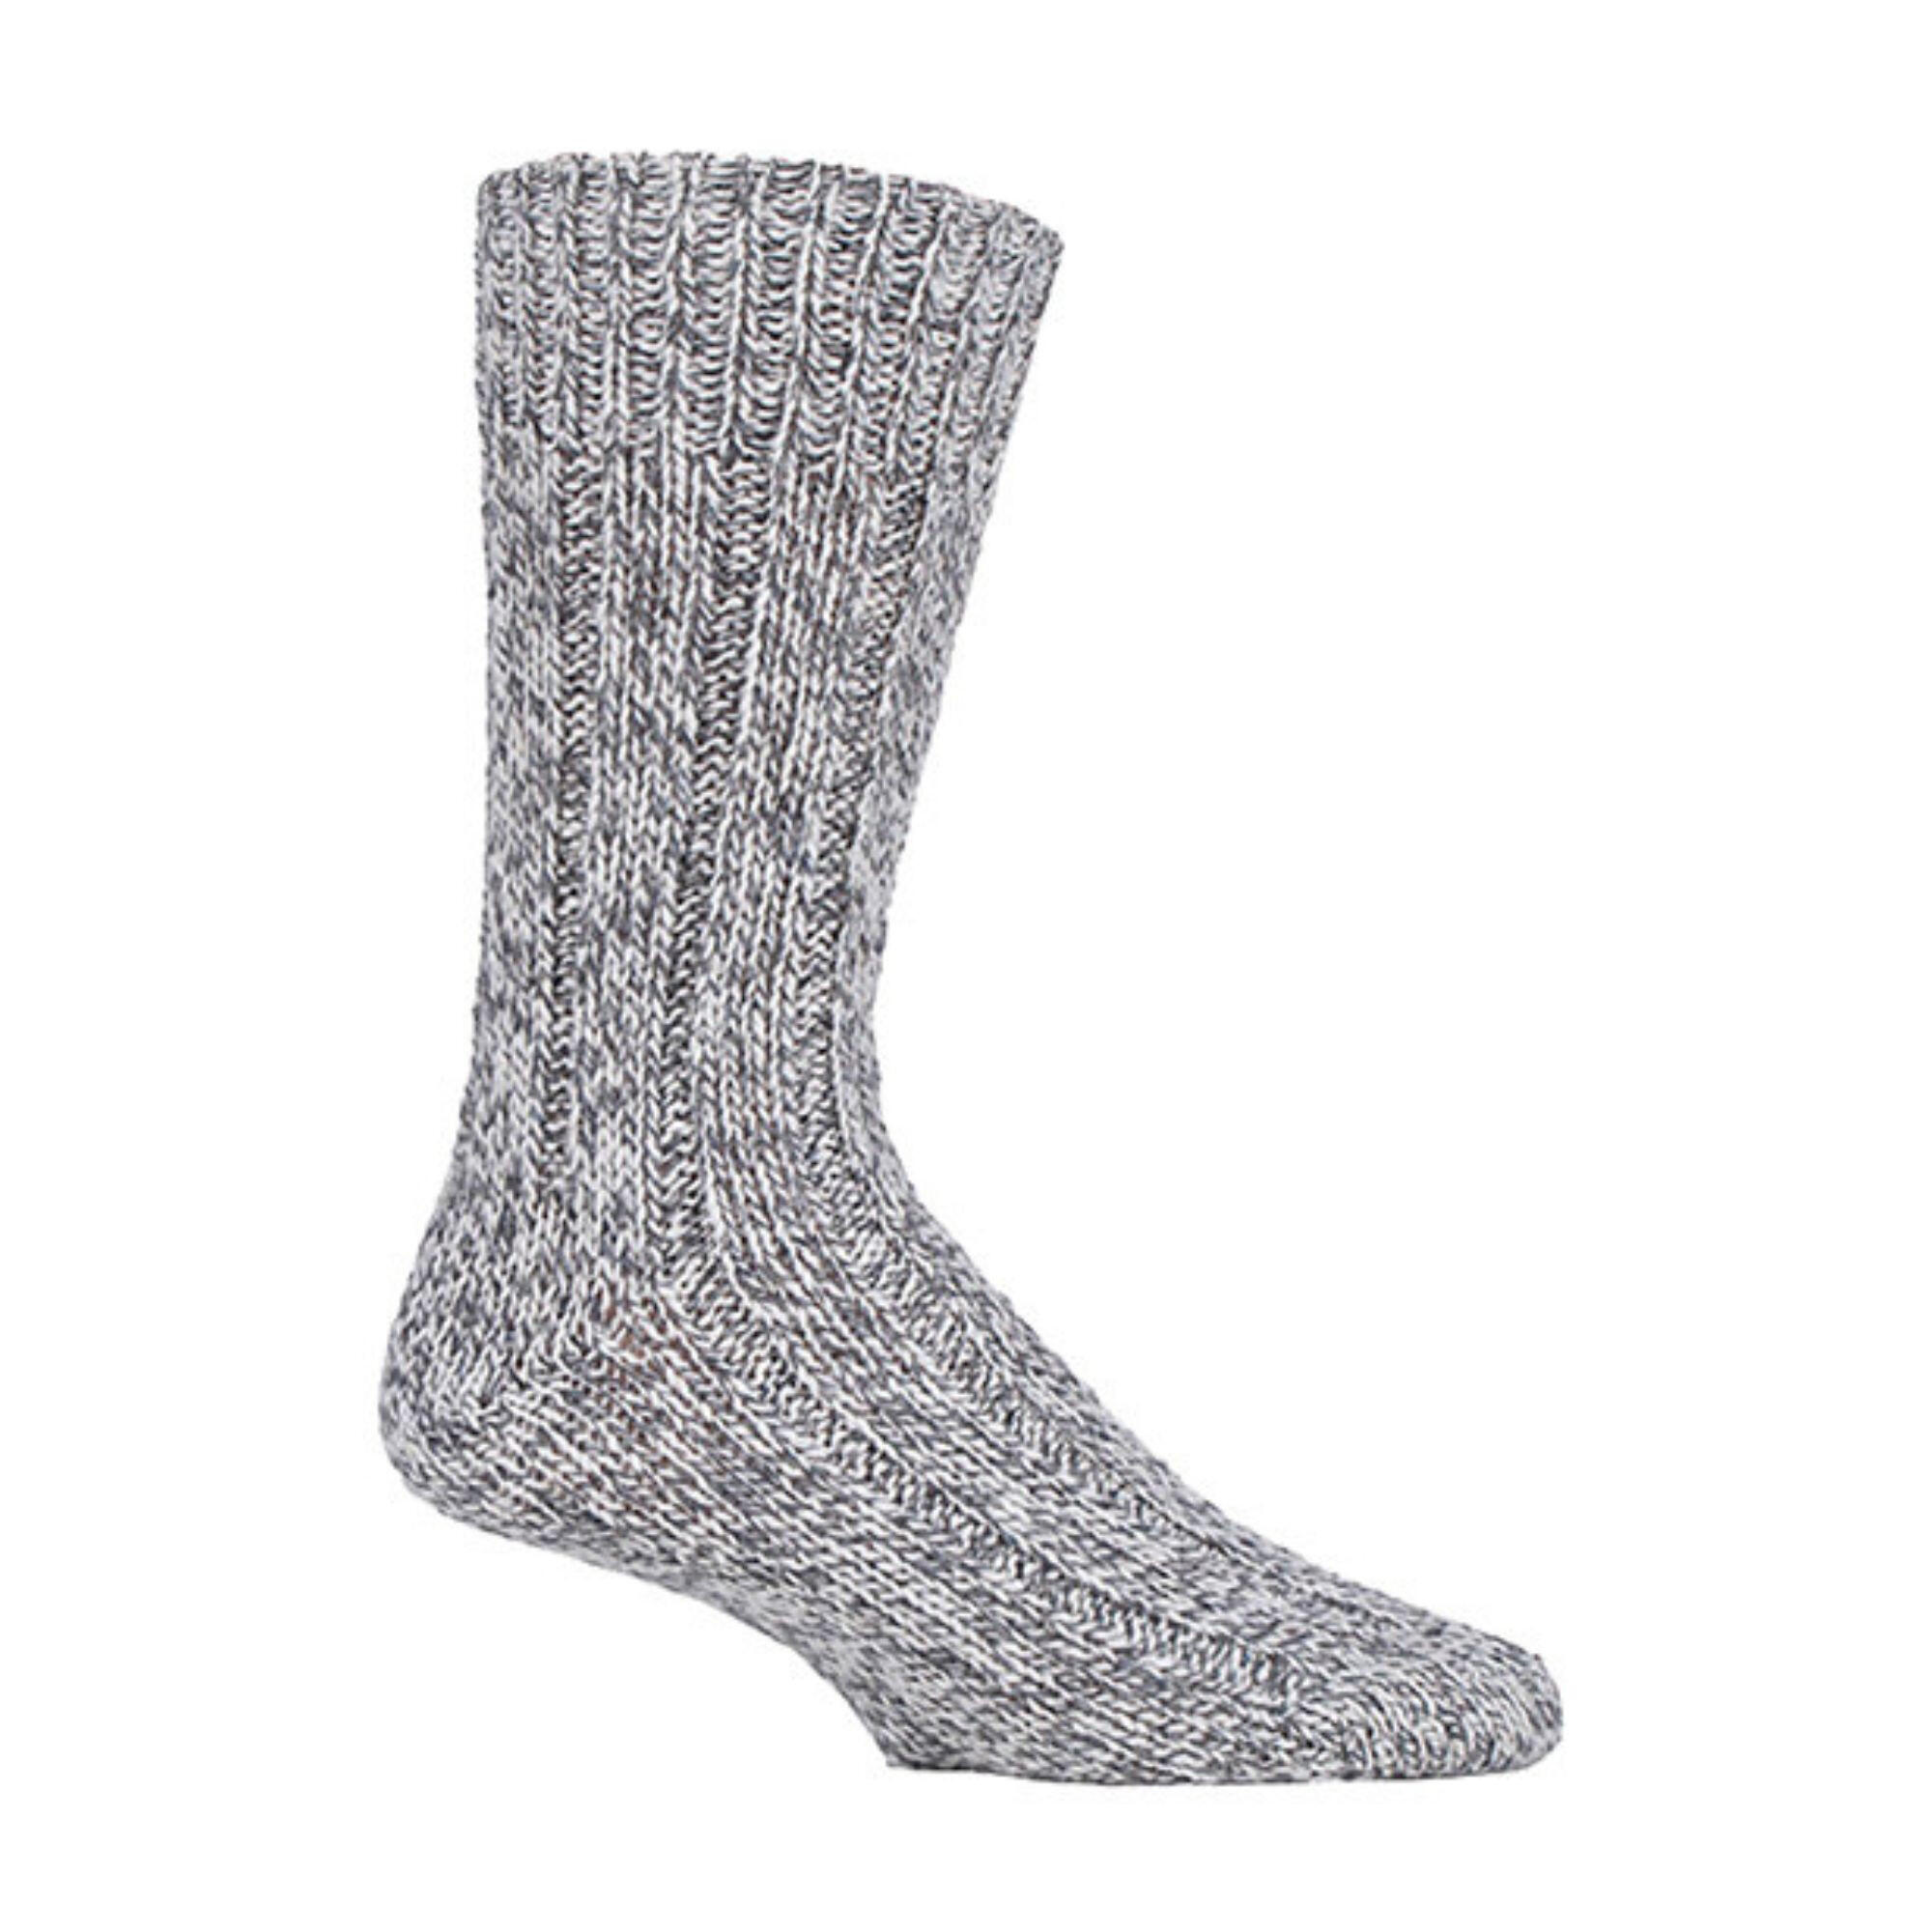 COUNTRY PURSUIT Mens Thick Heavy Kntted Wool Hiking Socks for Walking & Trekking